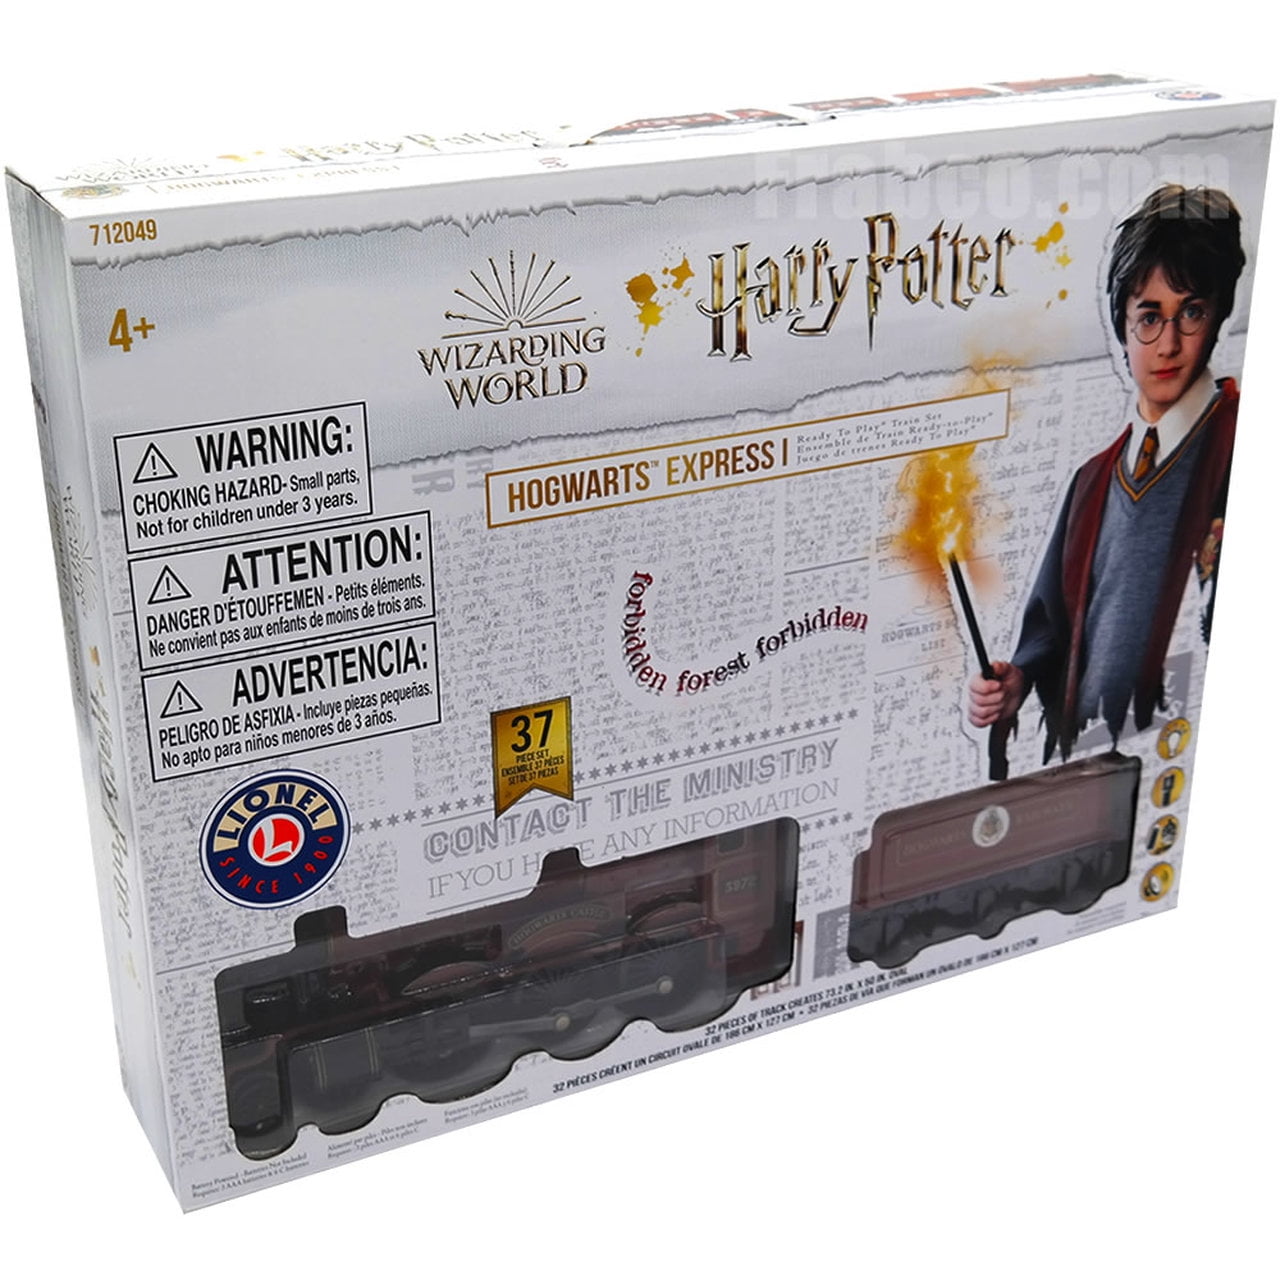 Hogwarts Express Ready to Play Train Set Lionel Trains Harry Potter